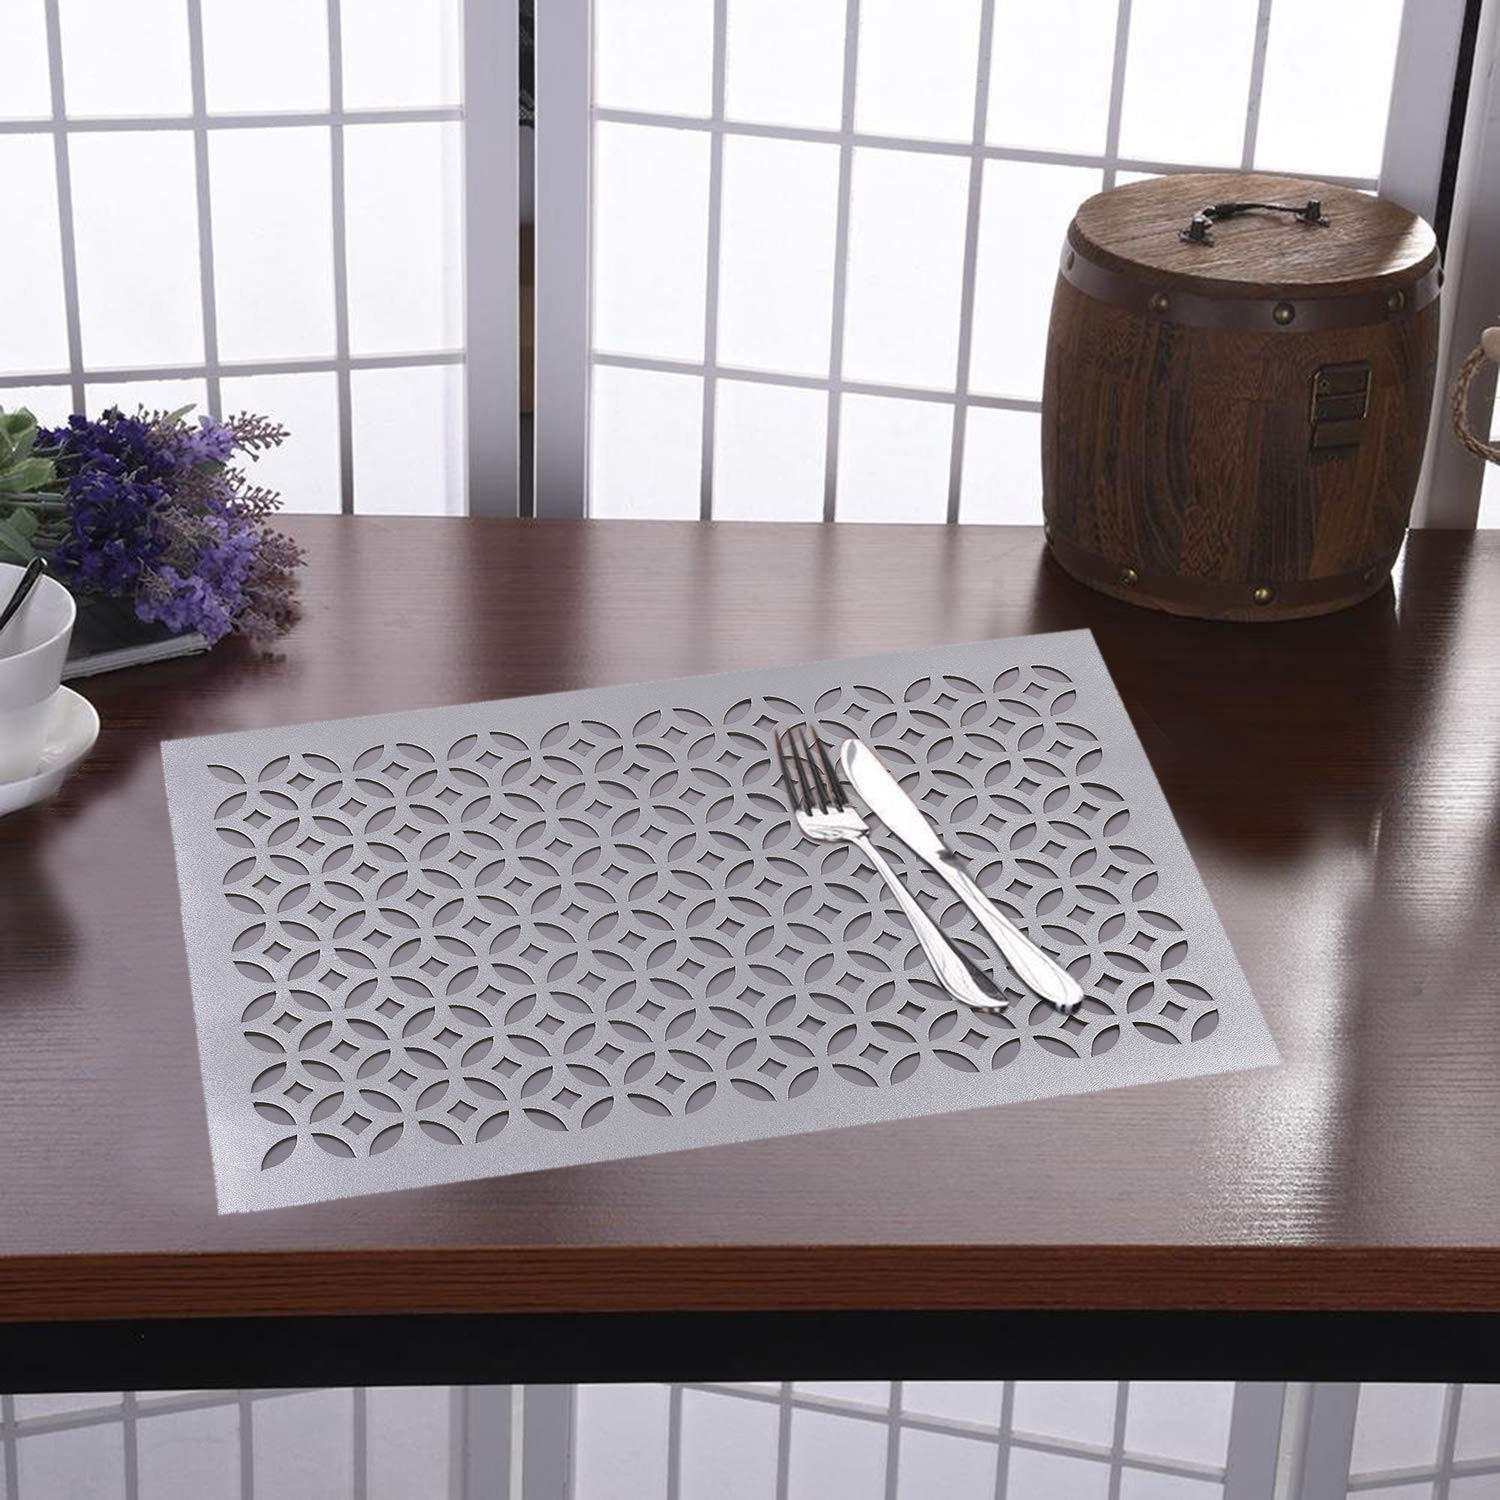 Kuber Industries Rectangular Soft Leather Table Placemats, Set of 4 (Silver)